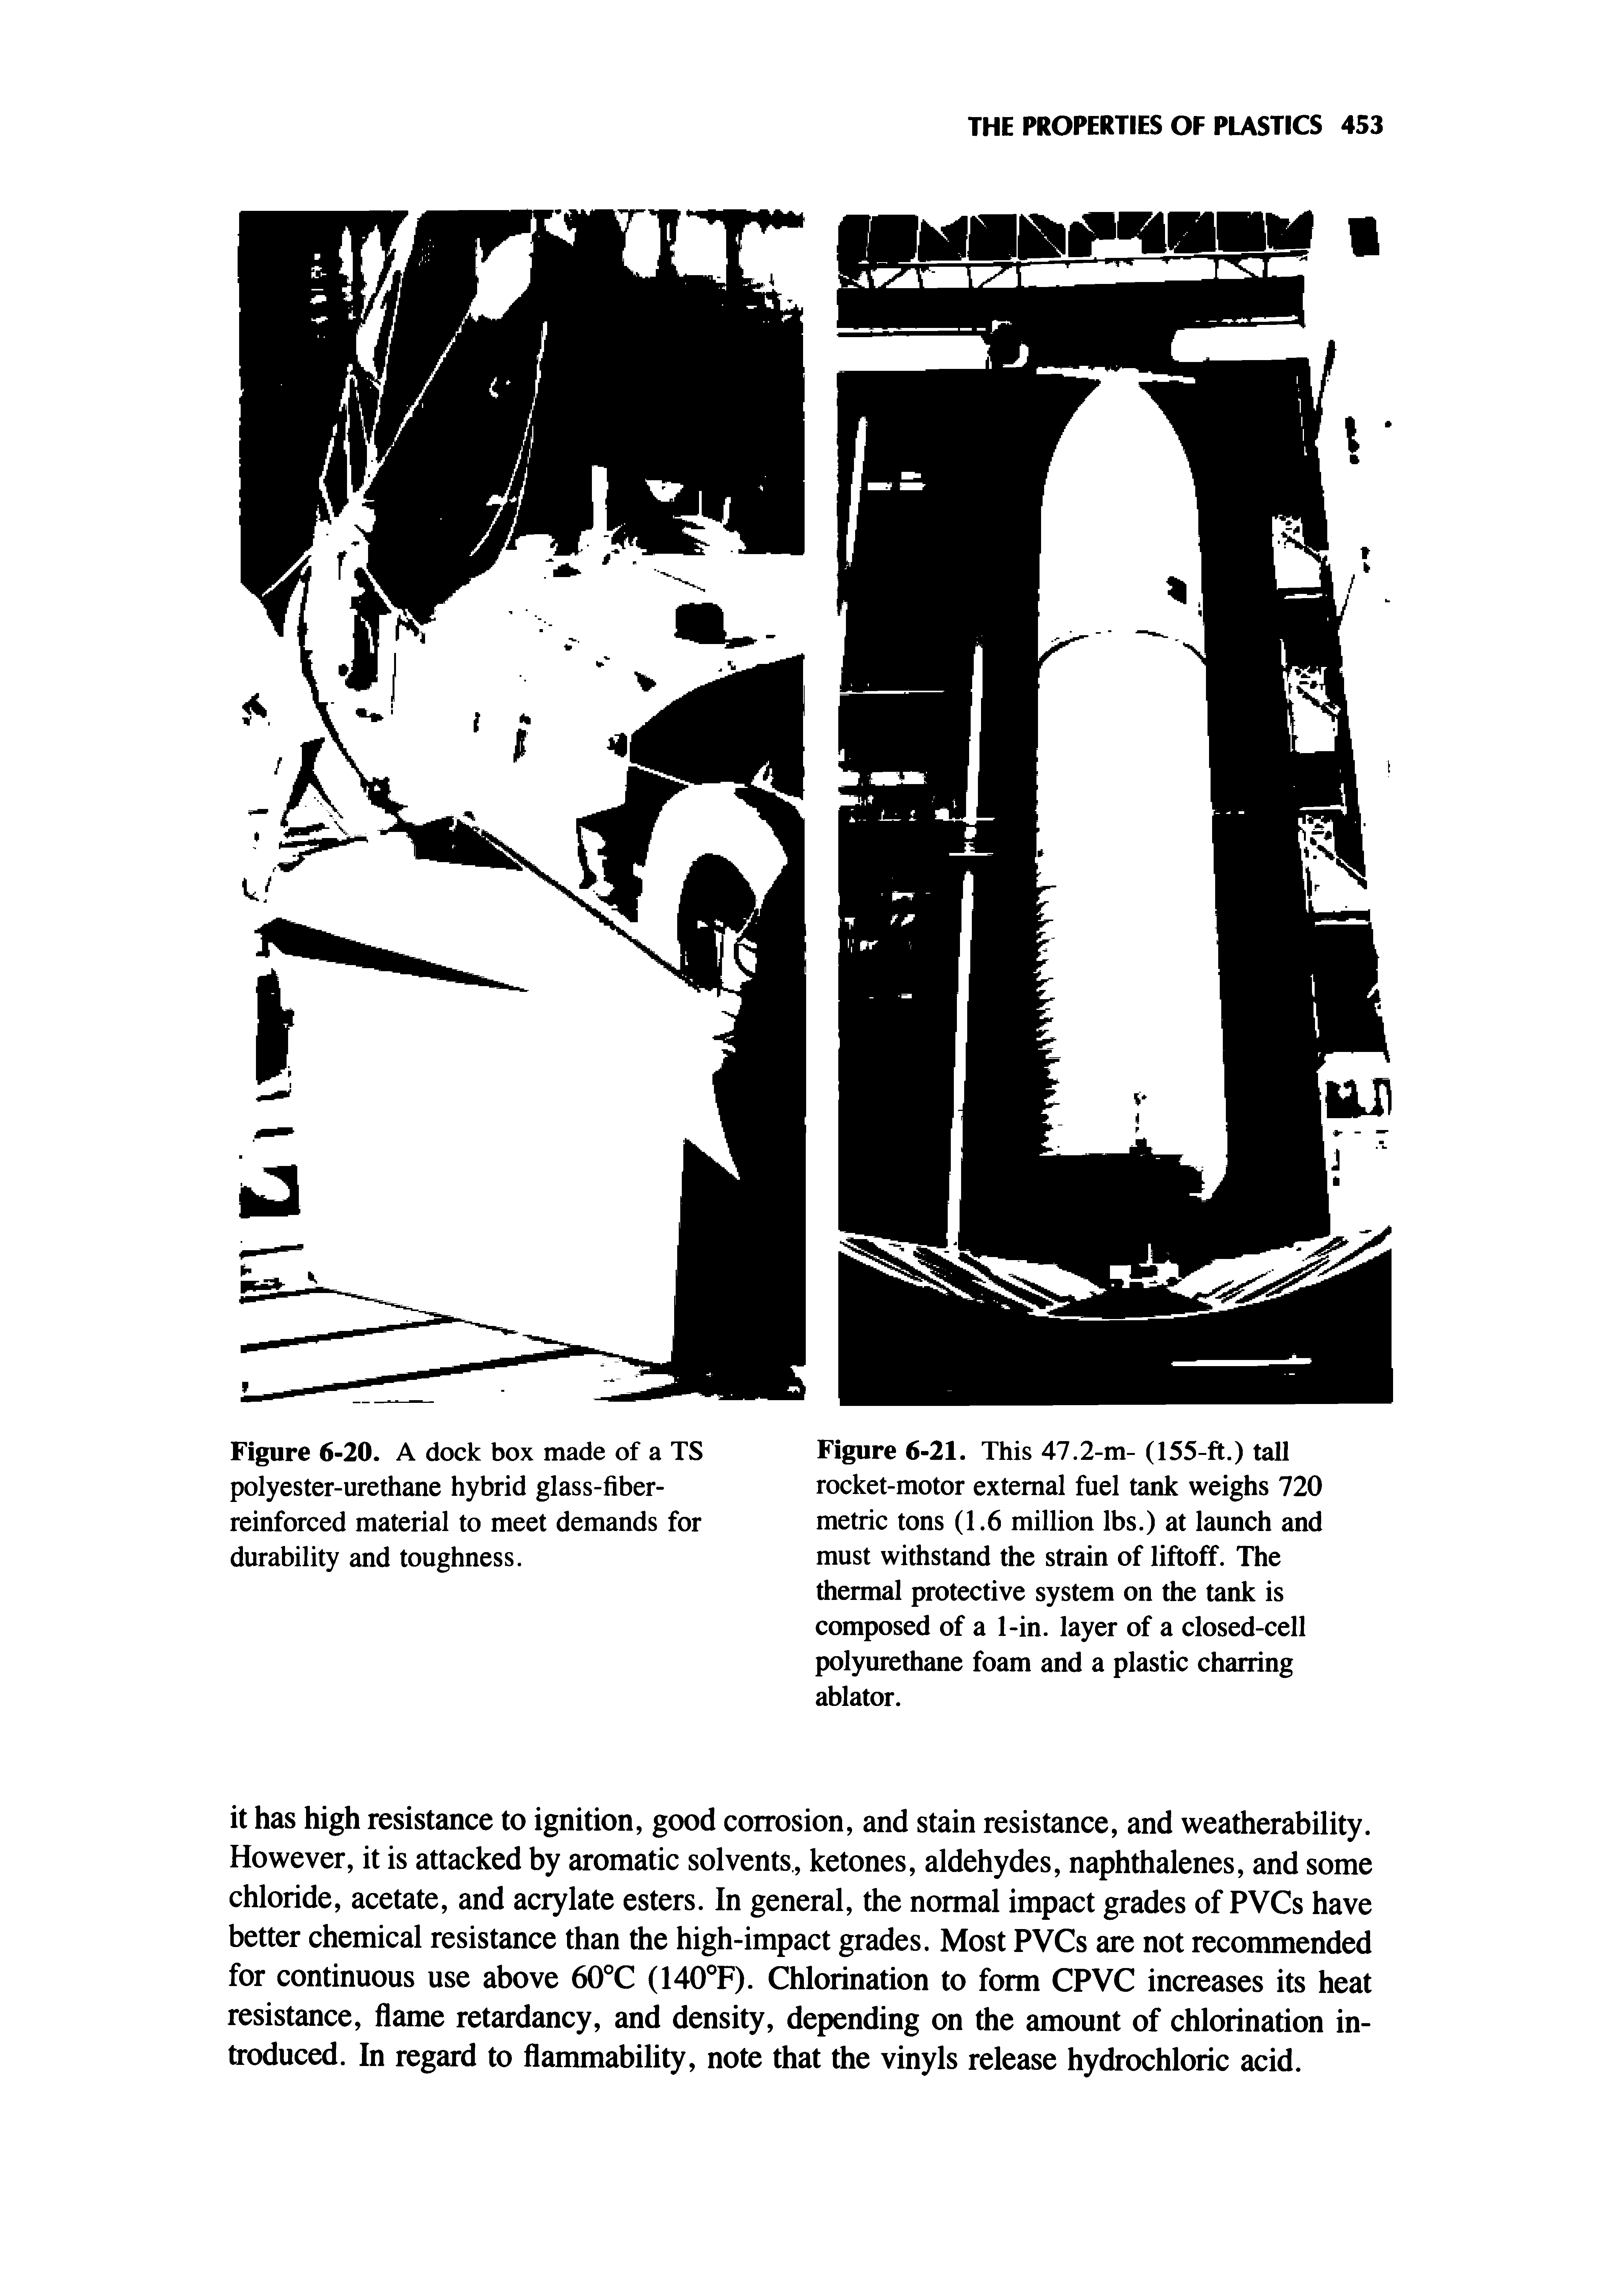 Figure 6-21. This 47.2-m- (155-ft.) tall rocket-motor external fuel tank weighs 720 metric tons (1.6 million lbs.) at launch and must withstand the strain of liftoff. The thermal protective system on the tank is composed of a 1-in. layer of a closed-cell polyurethane foam and a plastic charring ablator.